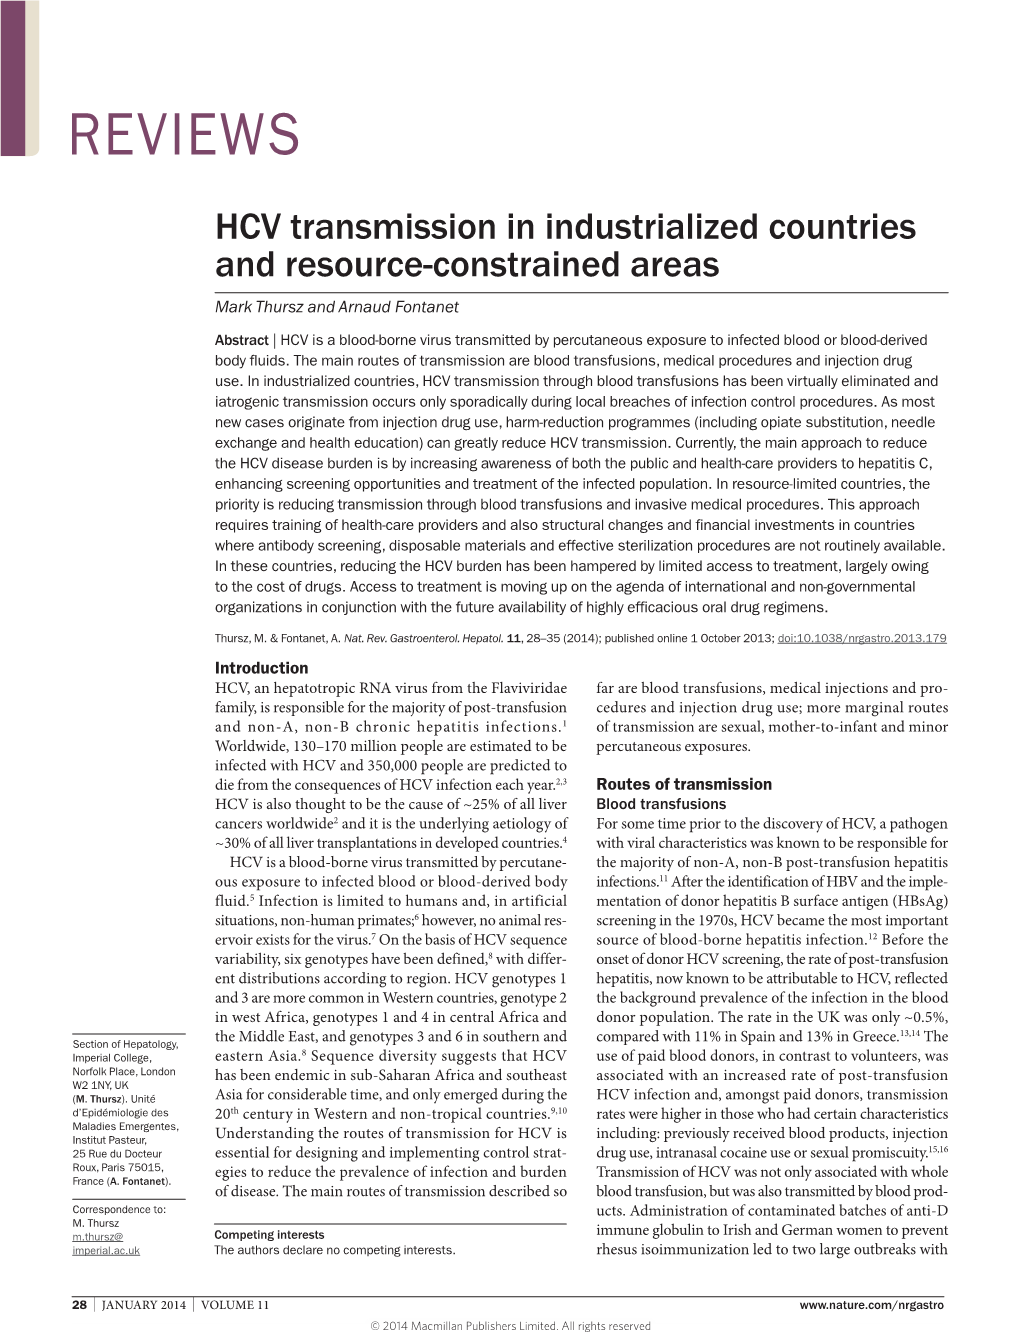 HCV Transmission in Industrialized Countries and Resource-Constrained Areas Mark Thursz and Arnaud Fontanet